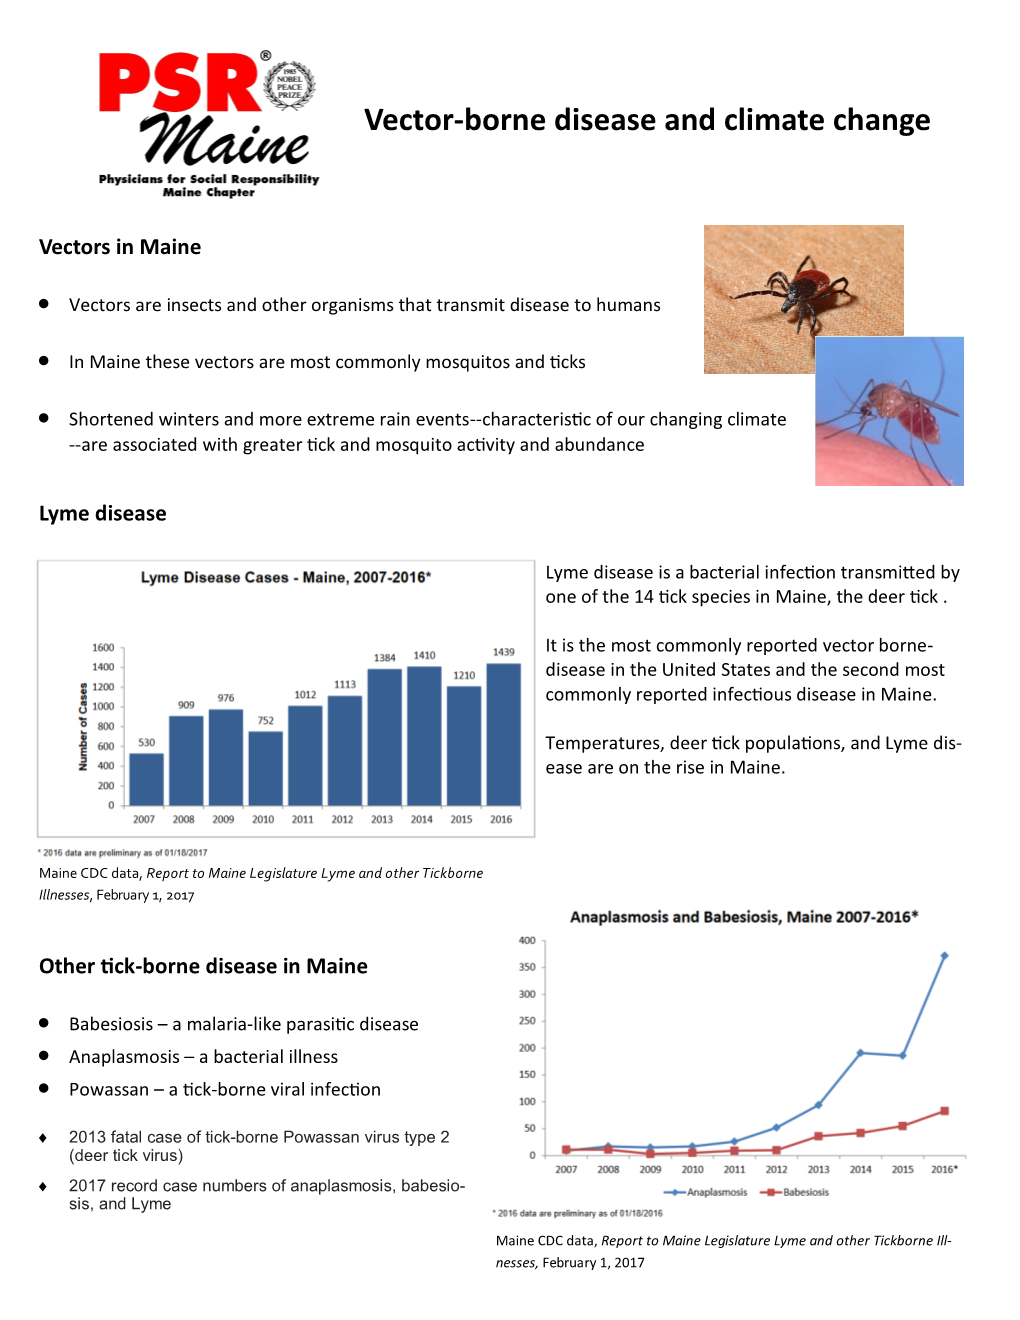 Vector-Borne Disease and Climate Change